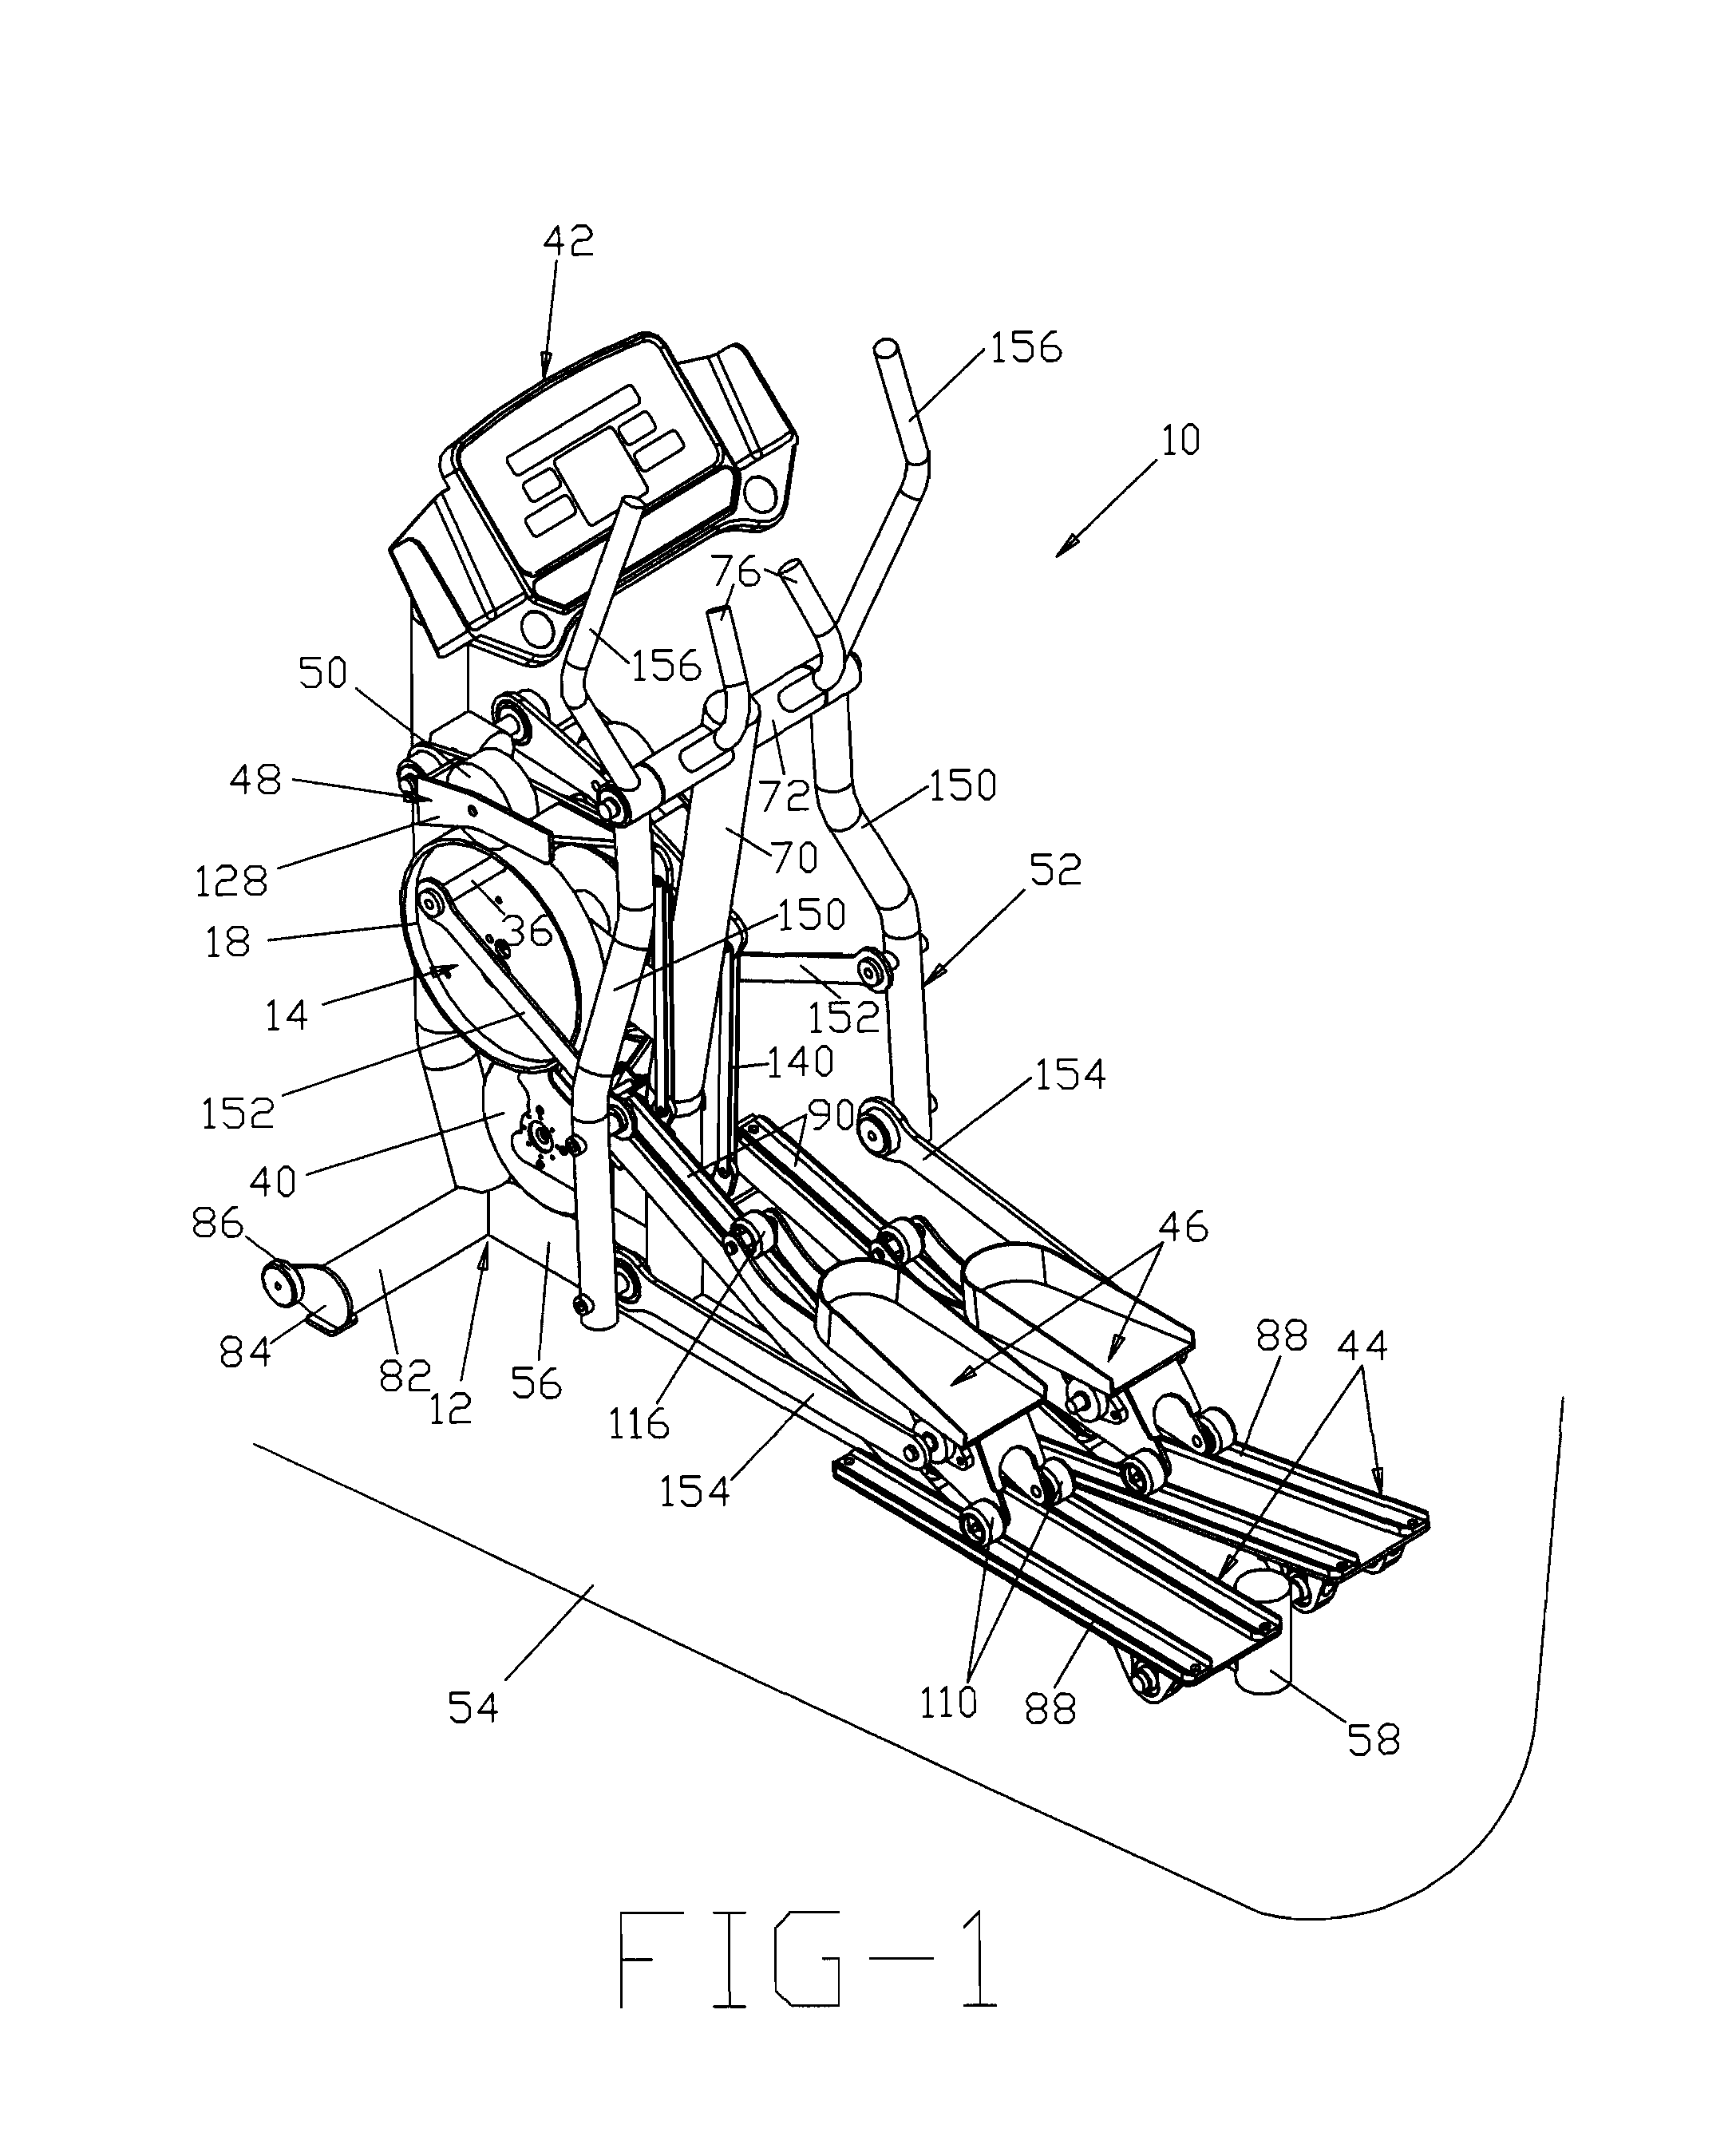 Walking/jogging exercise machine with articulated cam follower arrangement